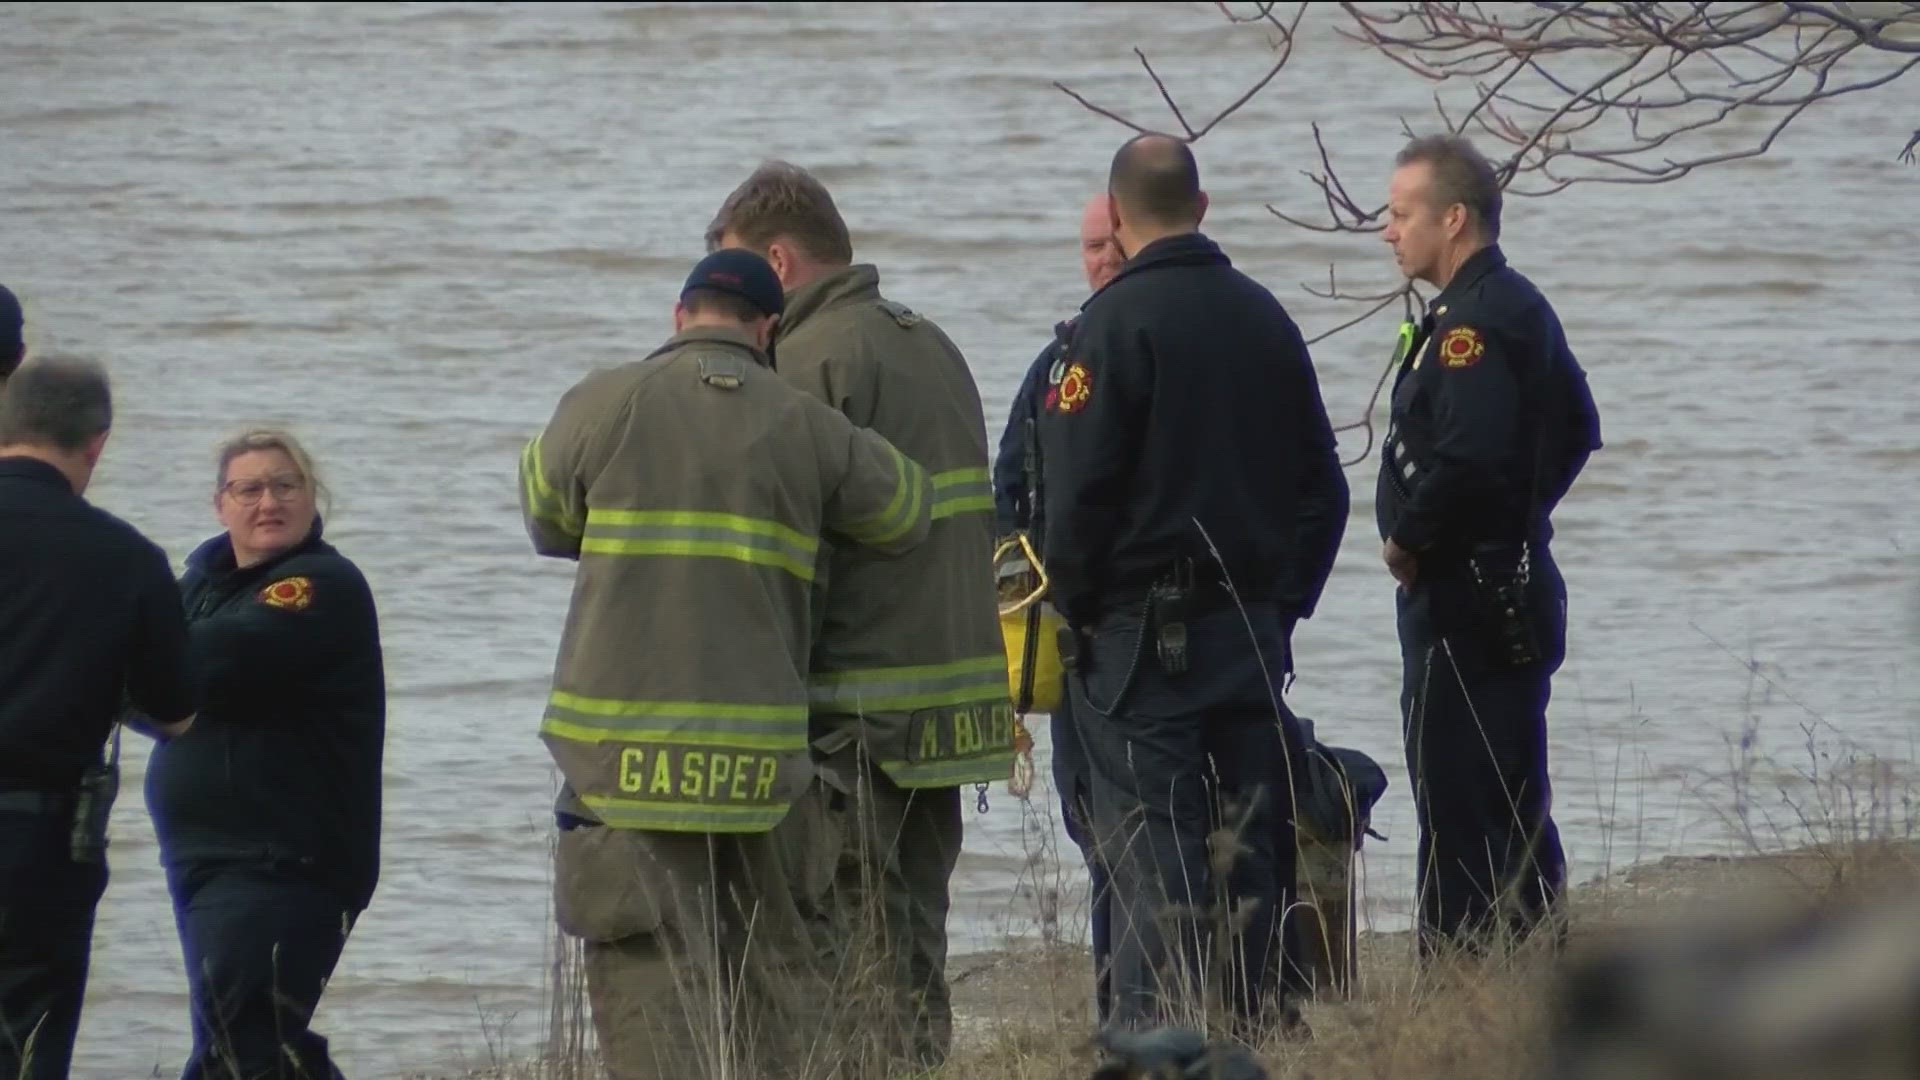 Crews used sonar equipment to search the area Monday from about 1-5:30 p.m. The search ended for the day so the data can be analyzed, TFRD said in a press release.